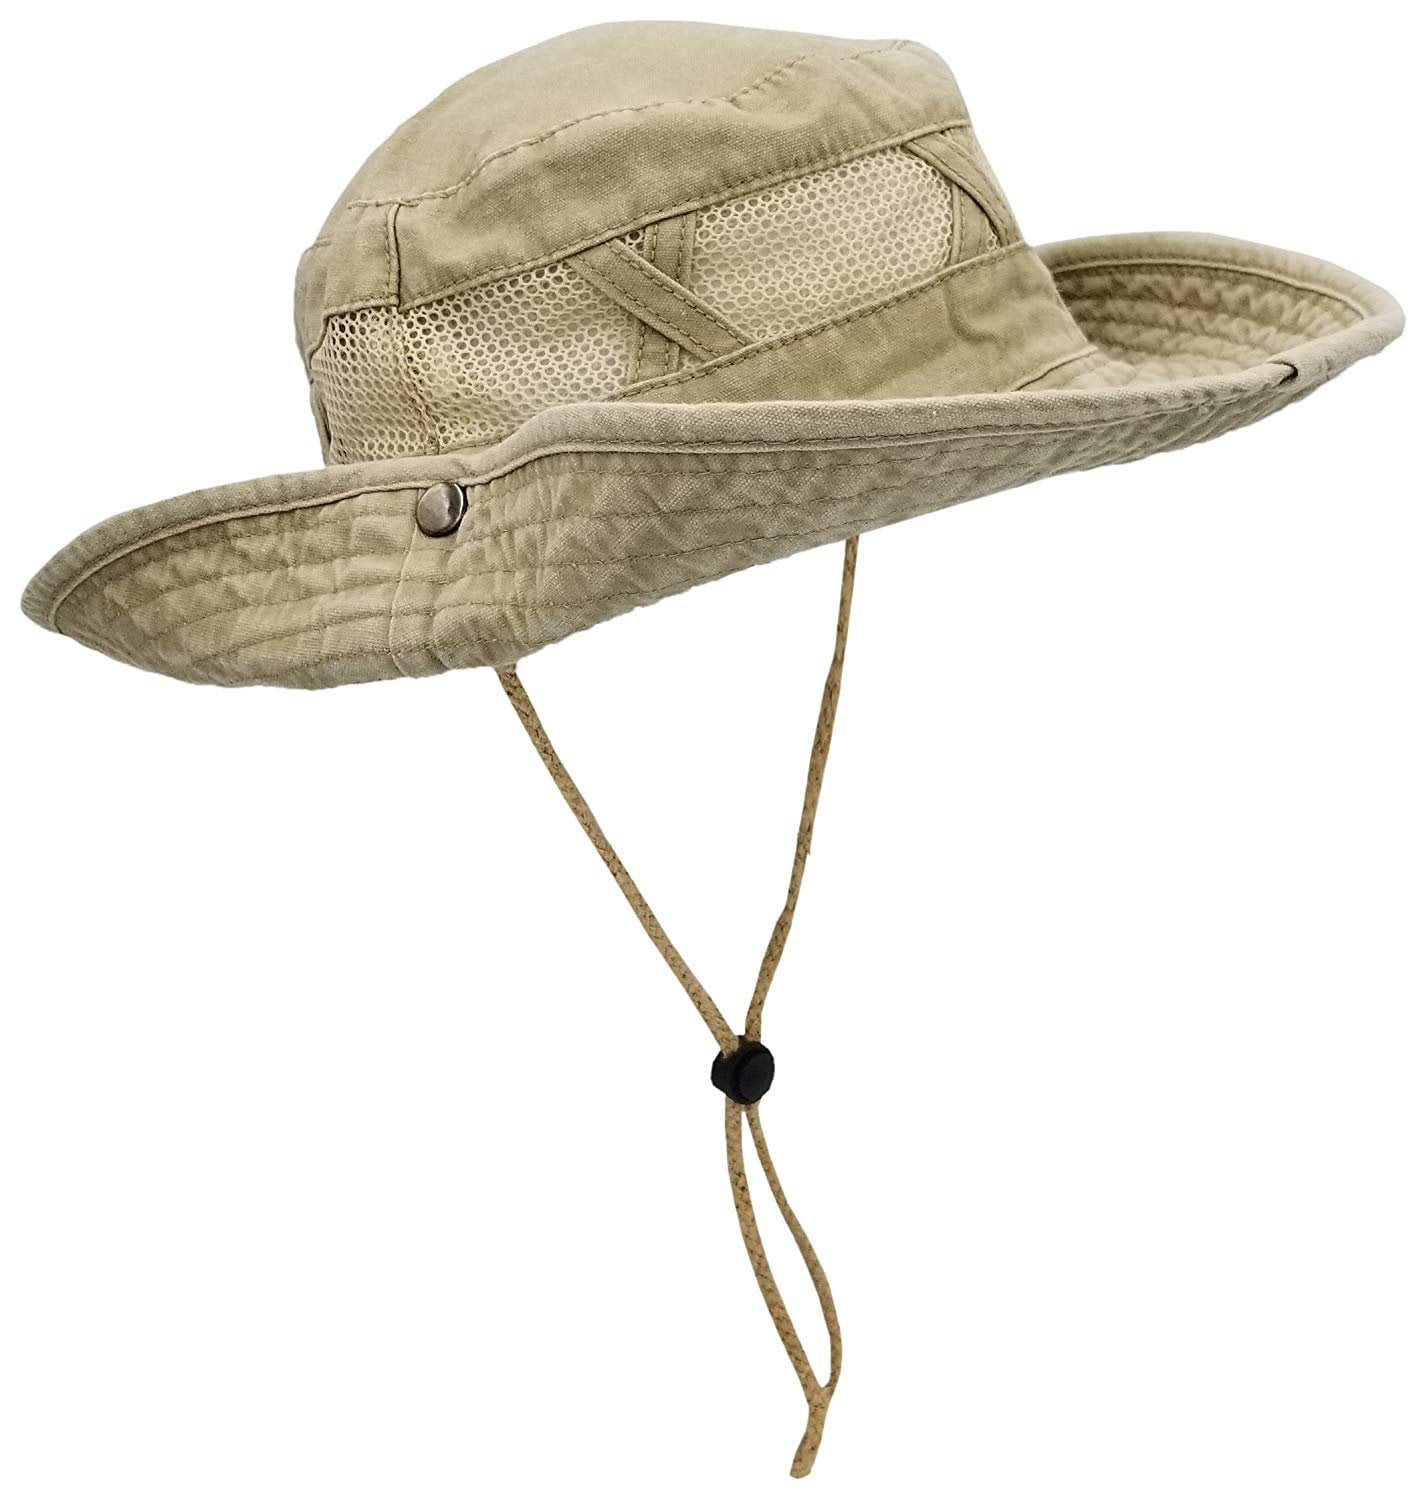 Outdoor Summer Boonie Hat for Hiking, Camping, Fishing, Operator Floppy ...